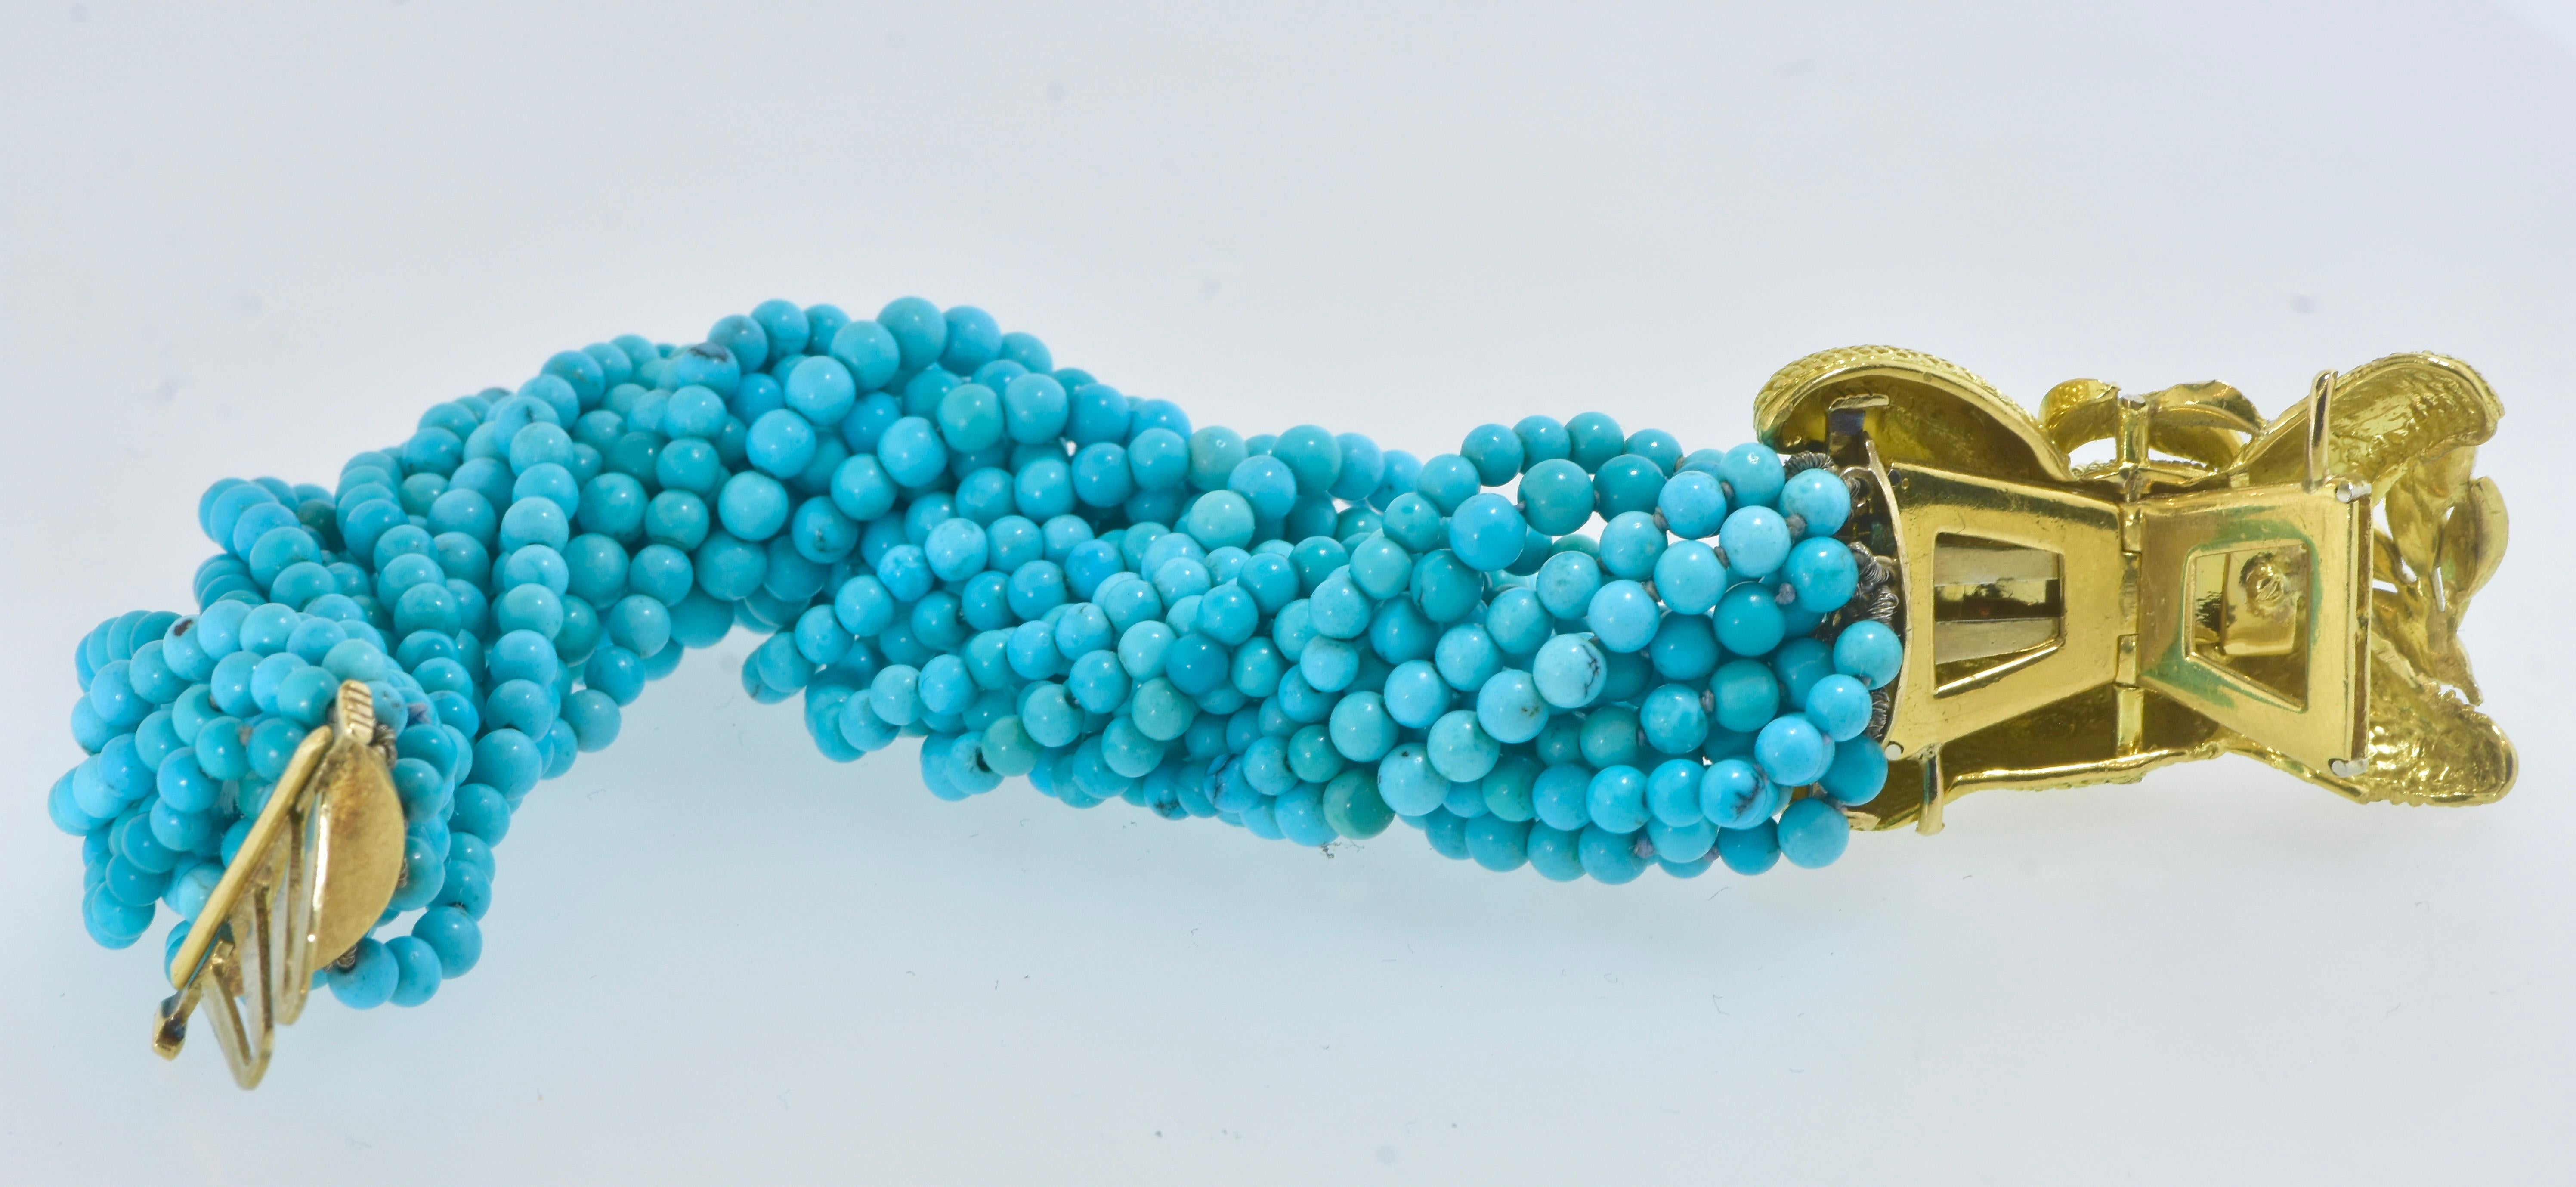 Fine Turquoise Bead Torsade Bracelet Centering an 18K High Relief Clasp, c. 1965 For Sale 6